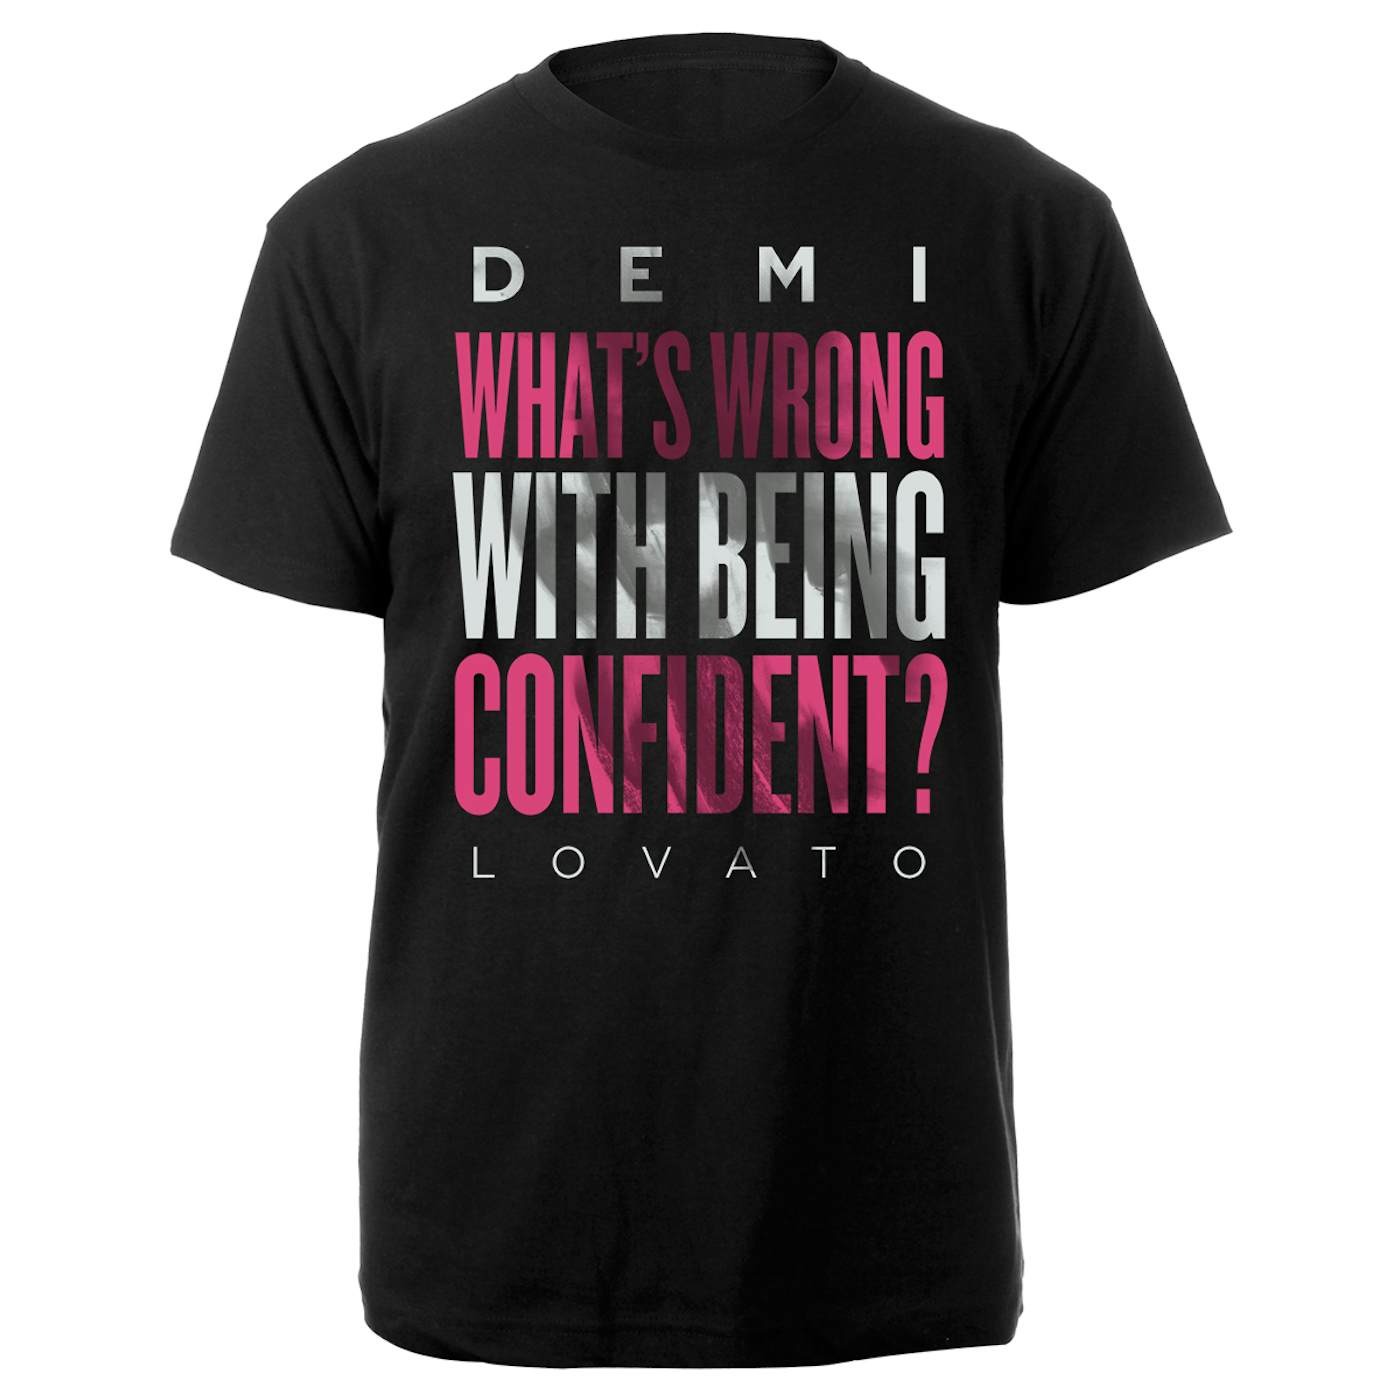 Demi Lovato What's Wrong with being Confident? Tee